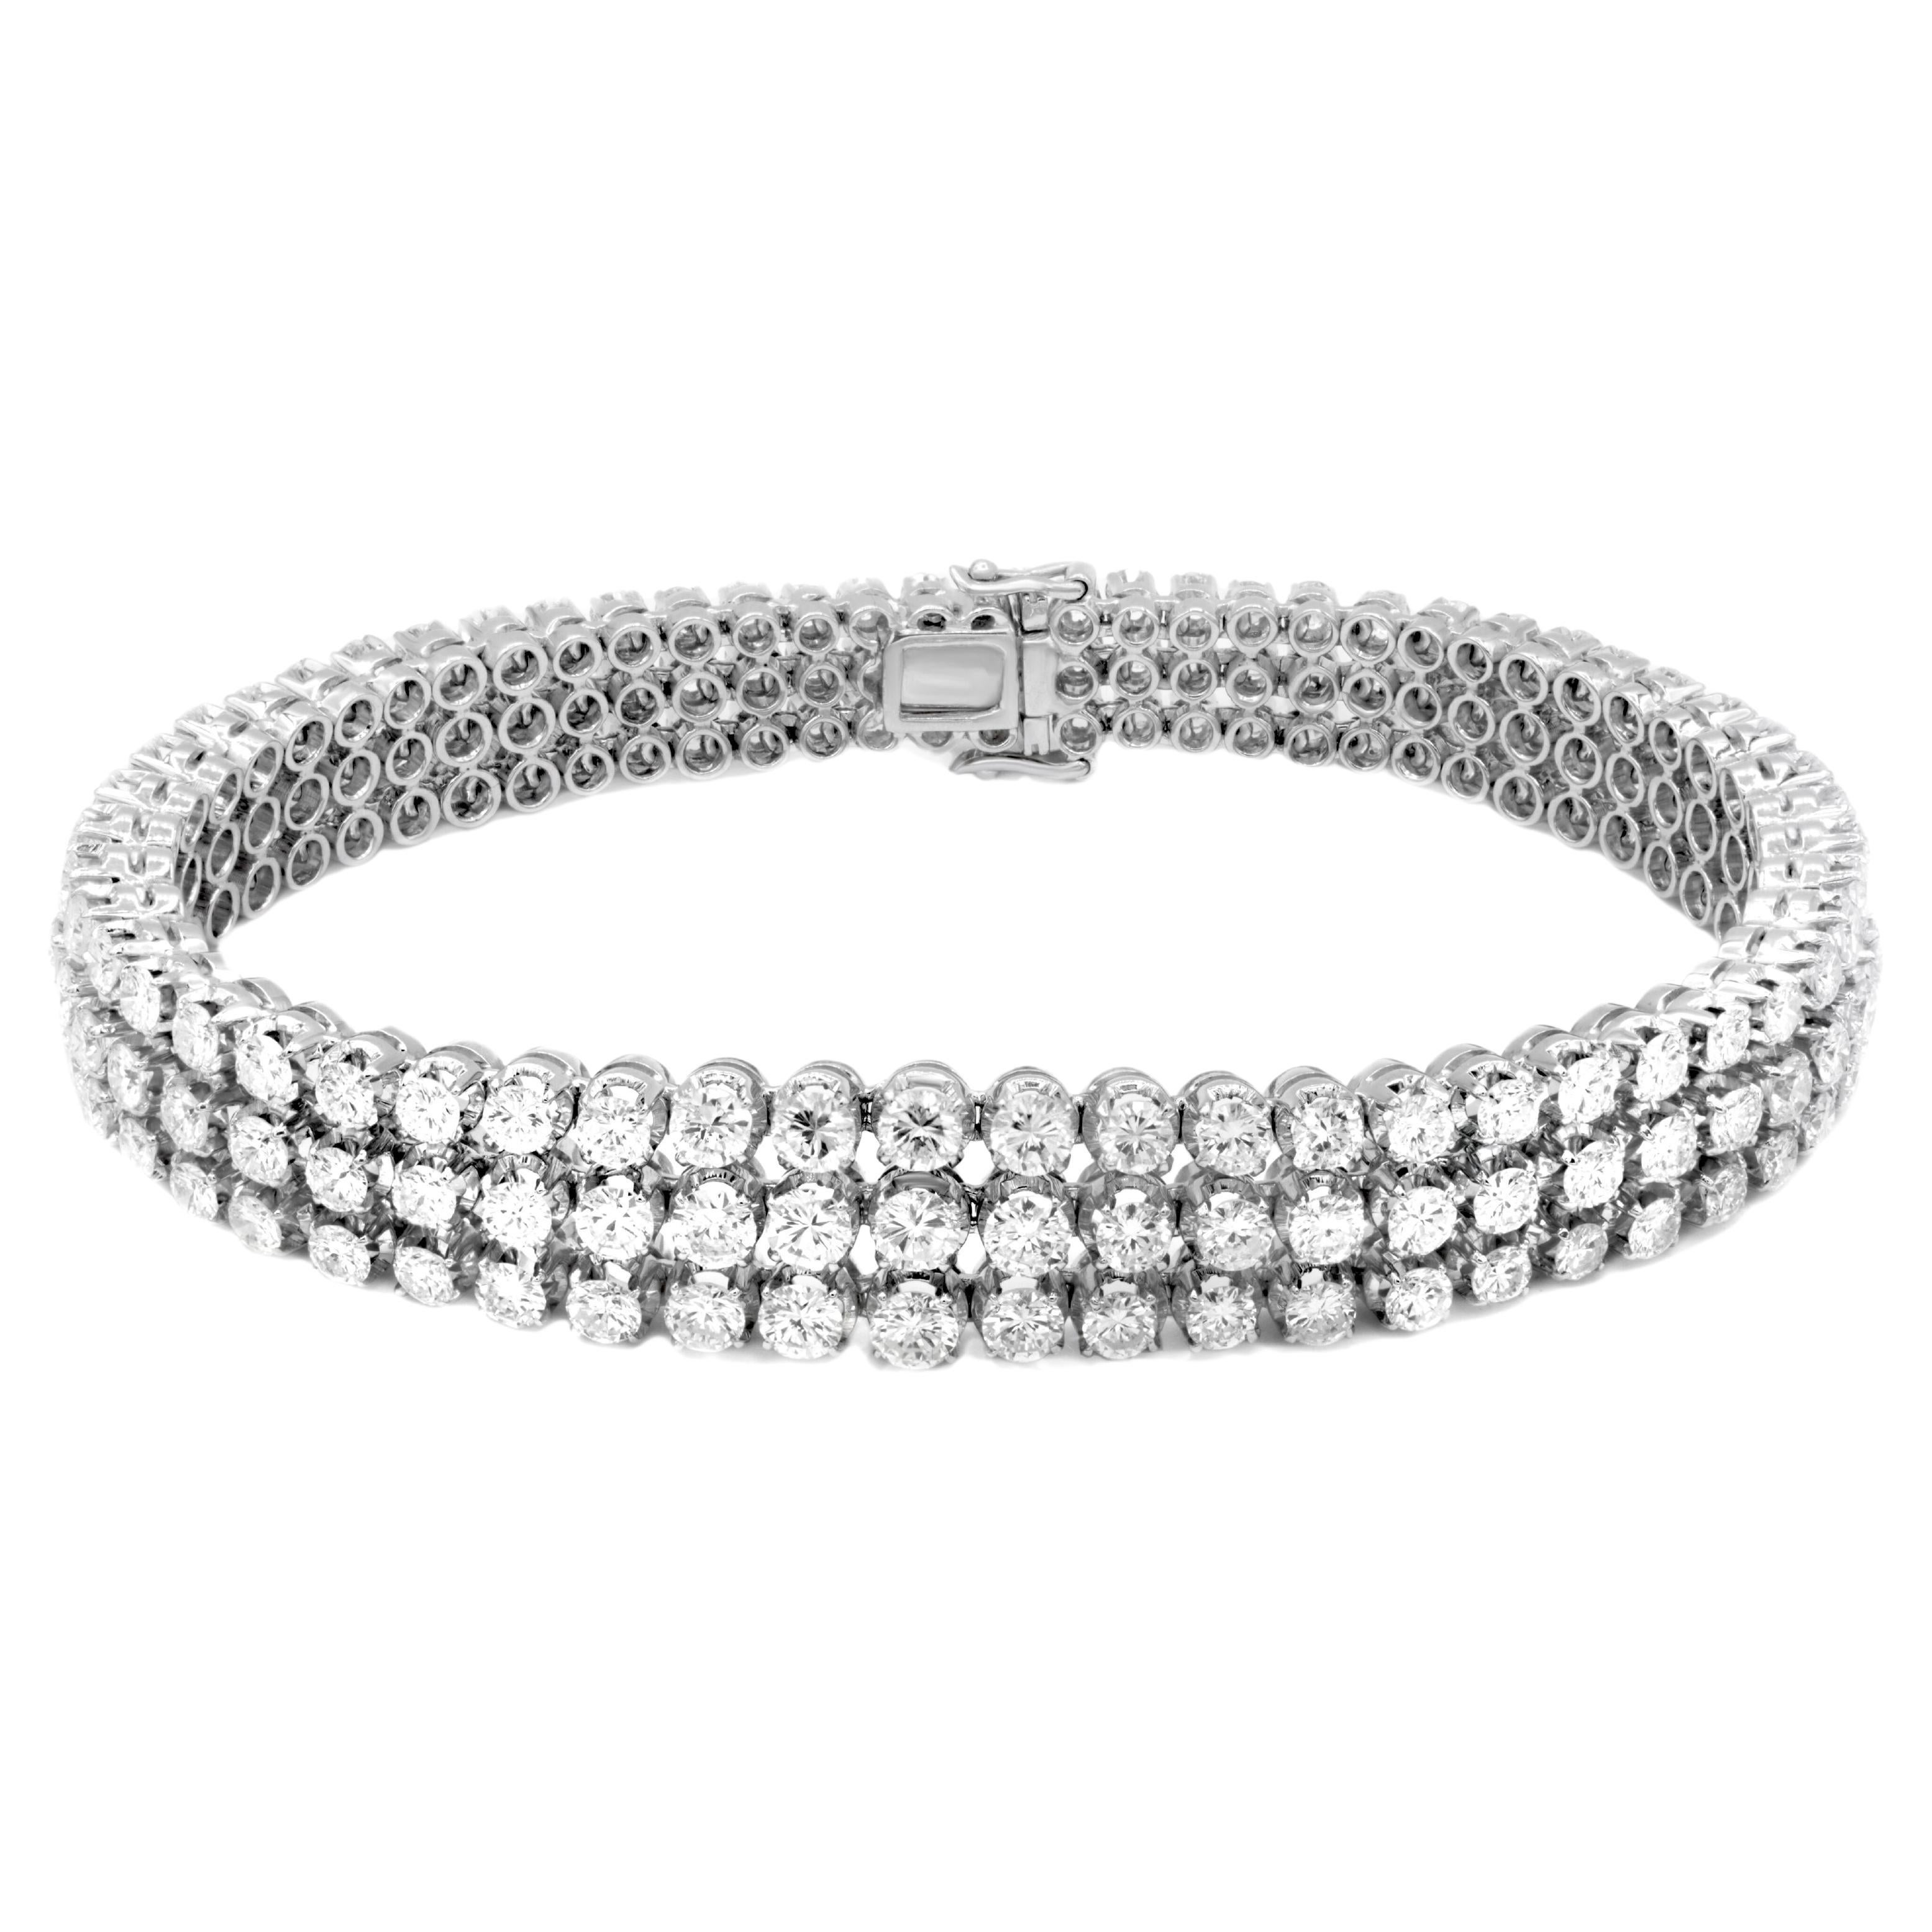 Diana M. 18kt white gold bracelet featuring 3 rows of 9.00 cts of Diamonds  For Sale